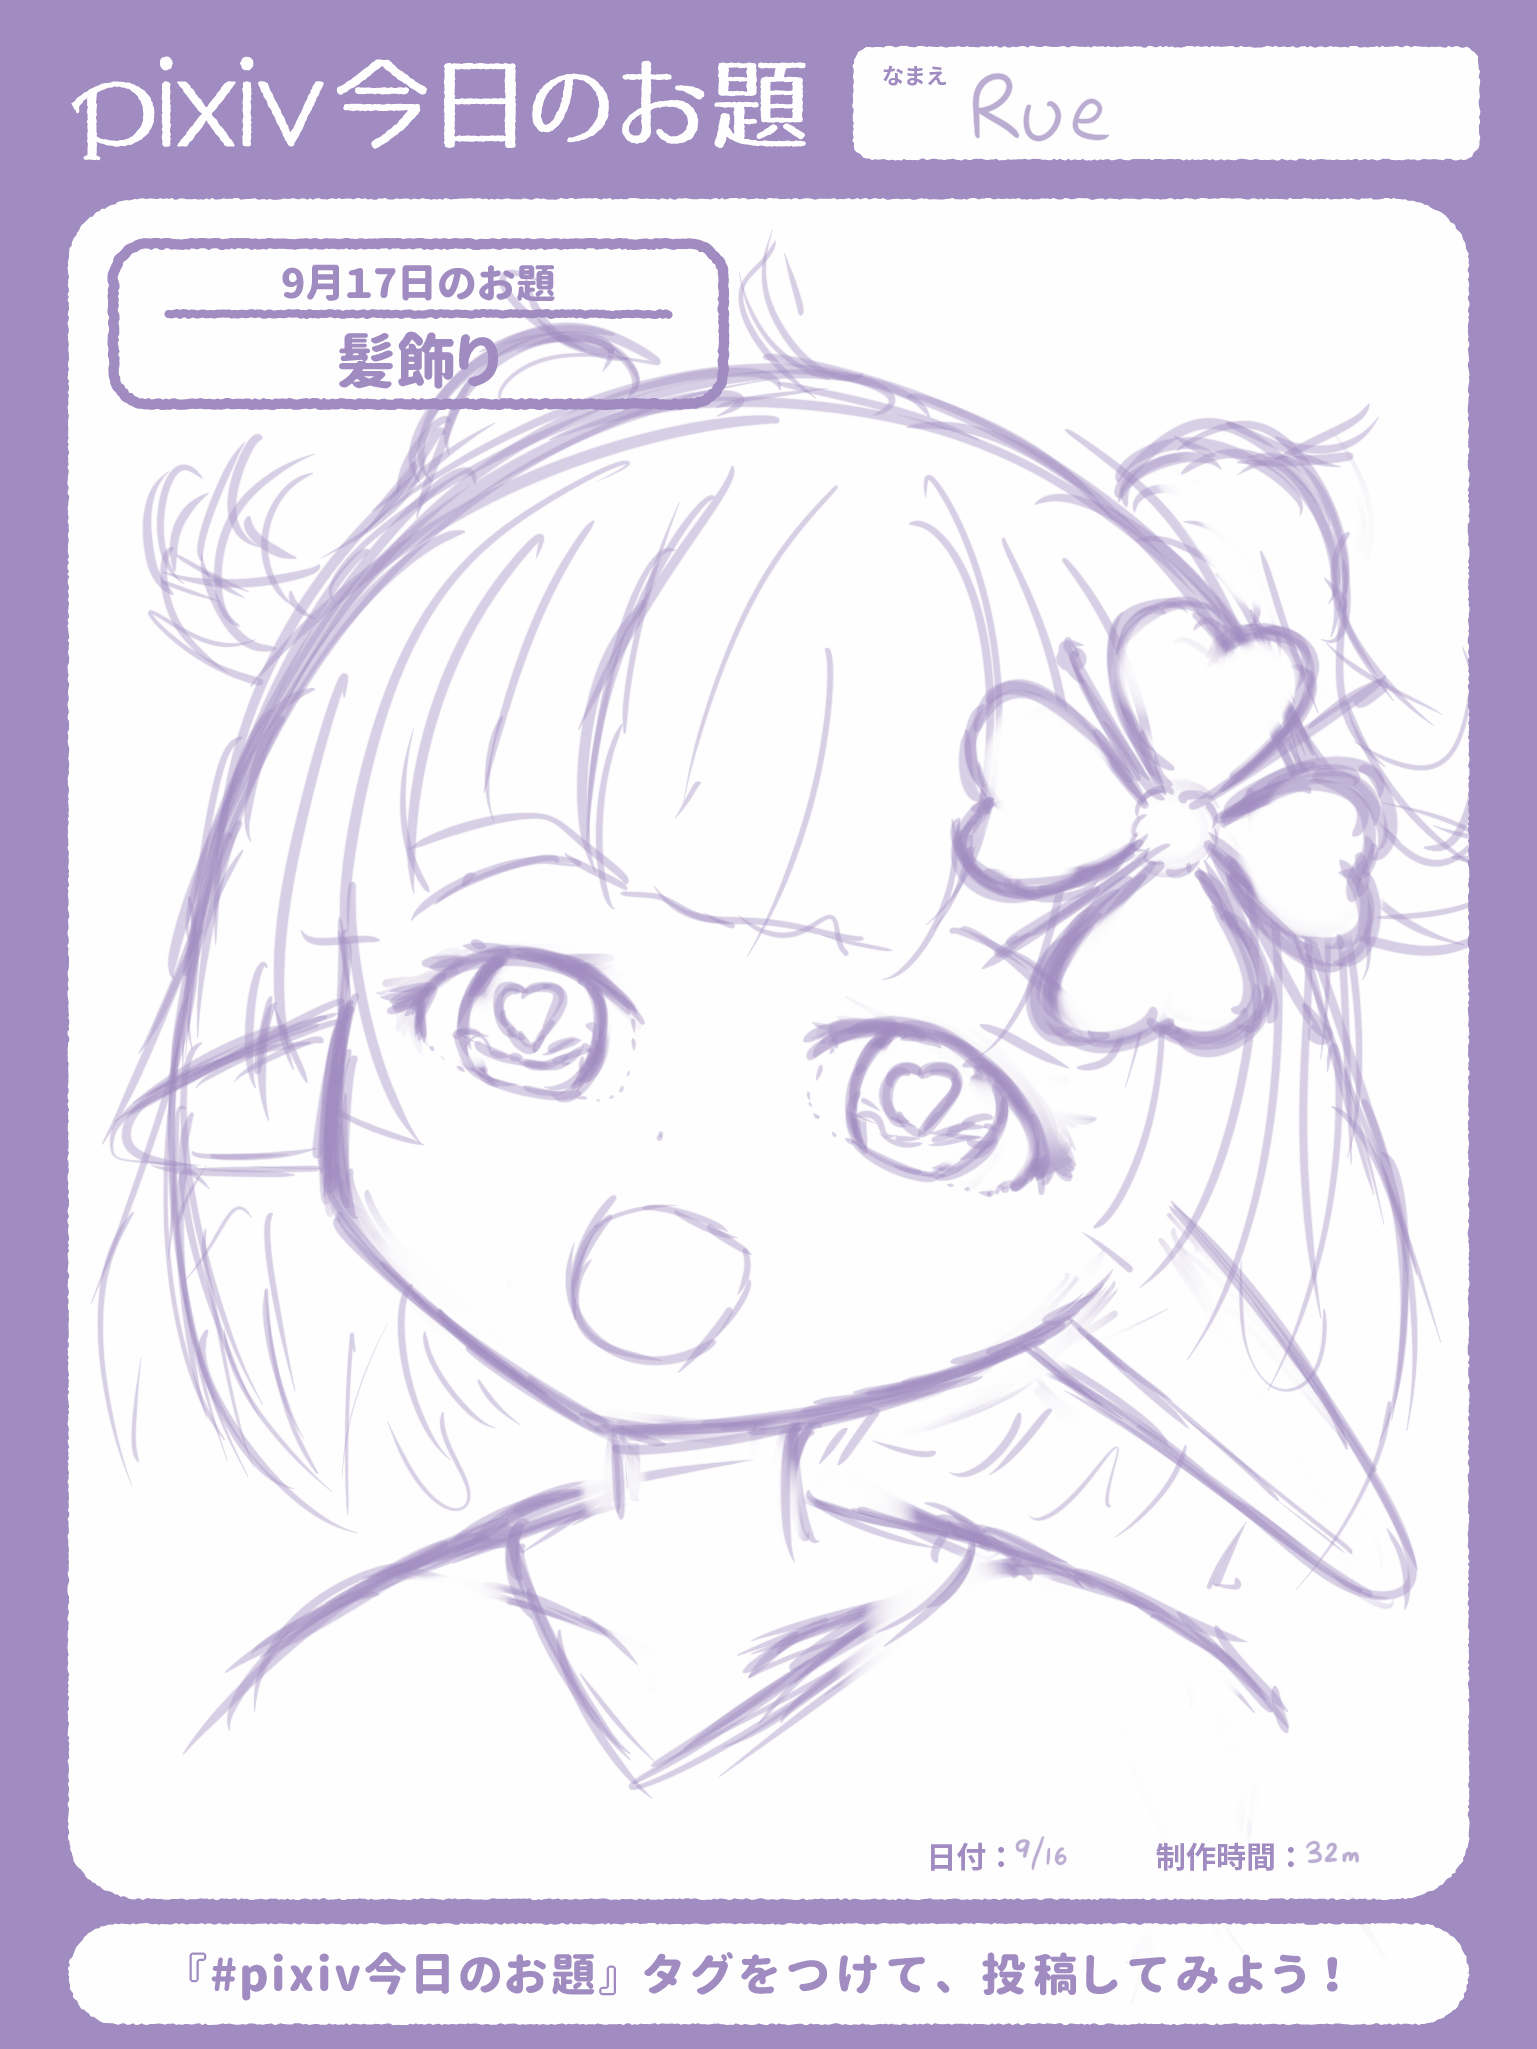 My sketch for today’s Pixiv theme of #髪飾り! It’s me with a flower in my hair.